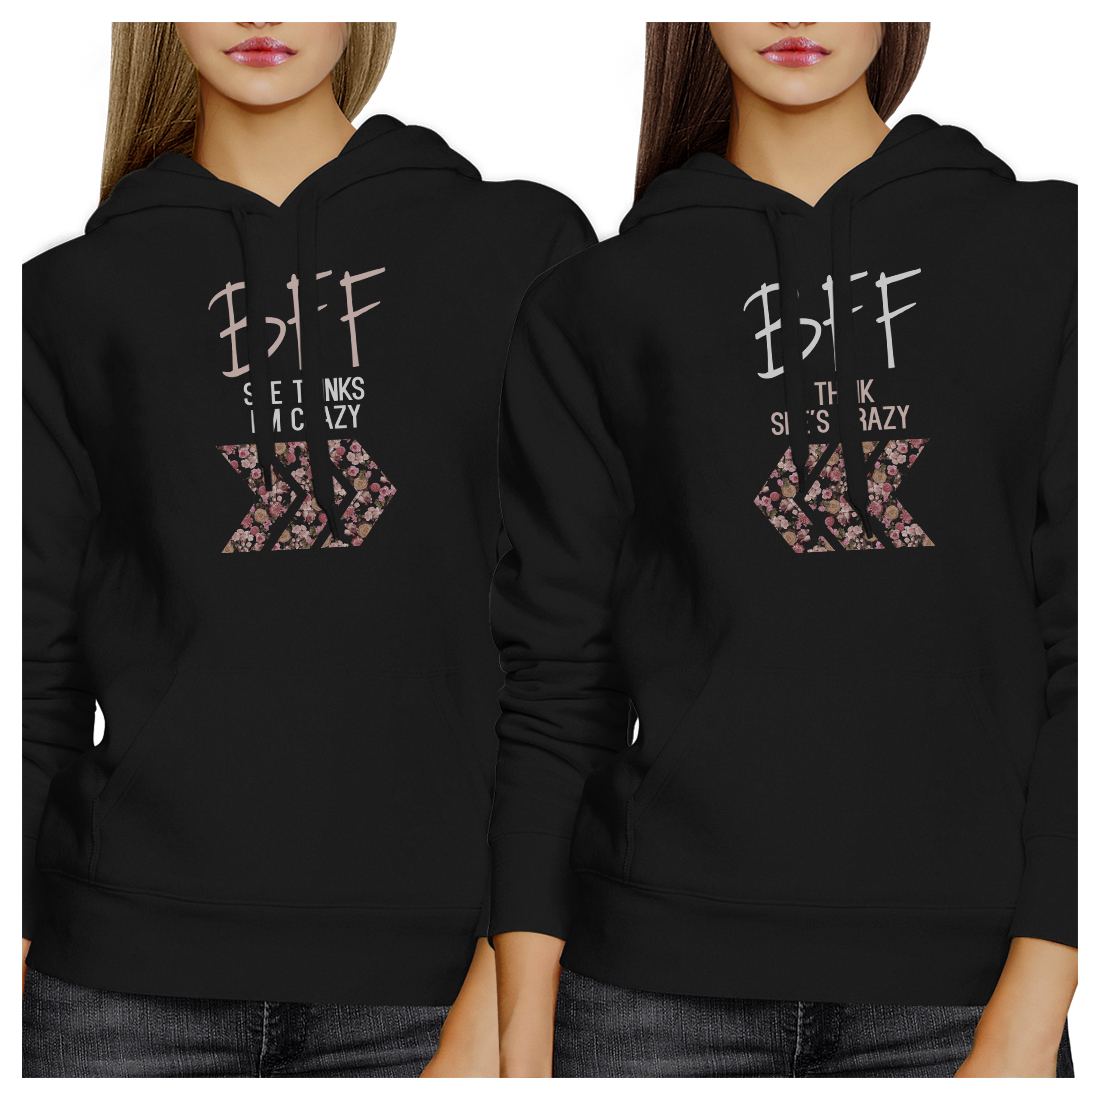 BFF Floral Crazy BFF Pullover Hoodies Matching Gift For Teen Girls - image 1 of 4